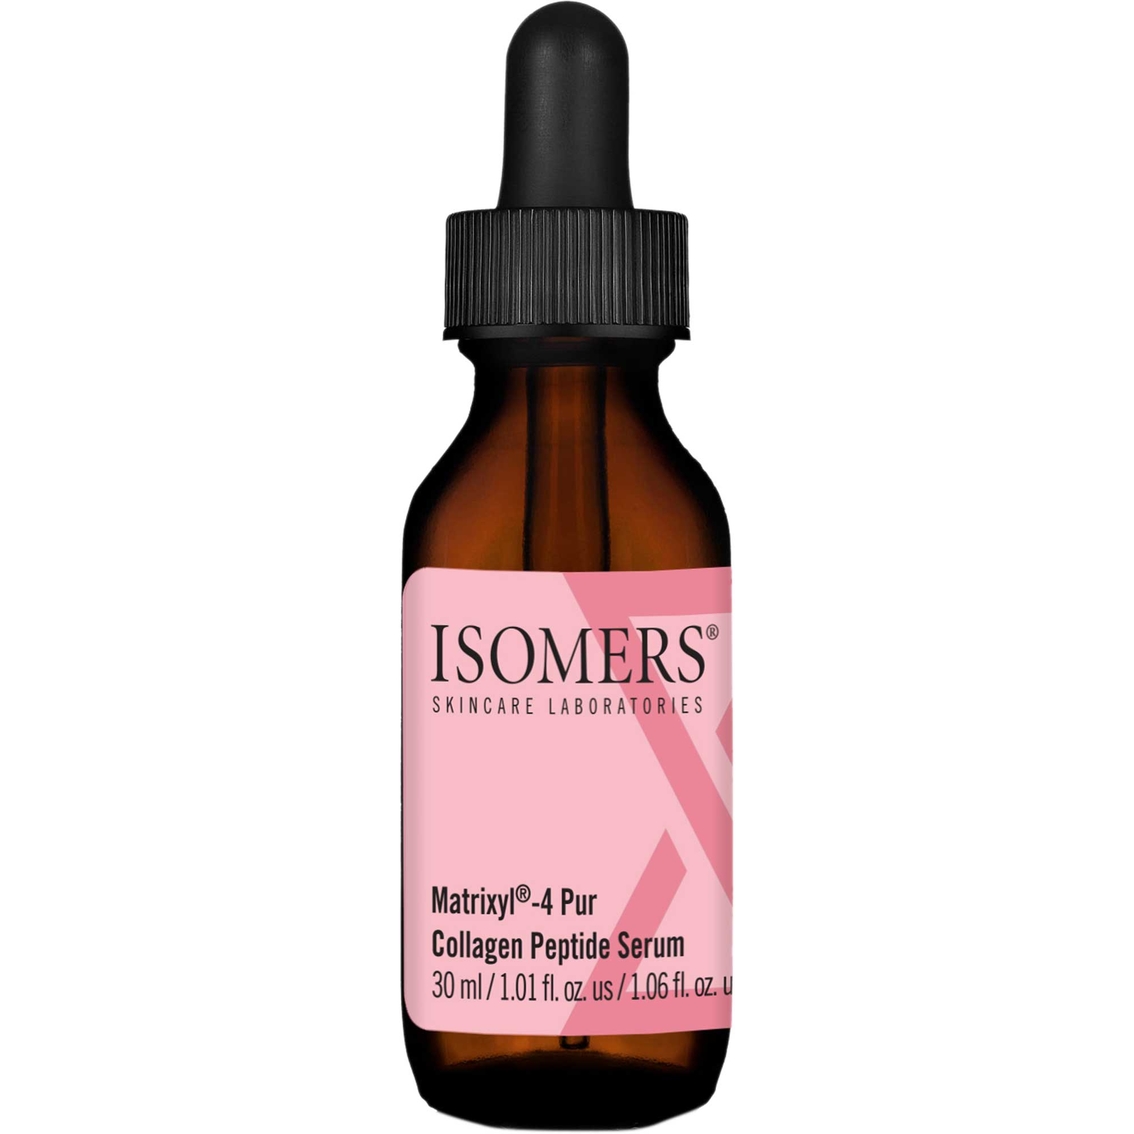 Isomers Matrixyl-4 Pur Collagen Peptide Serum | Anti-aging ...